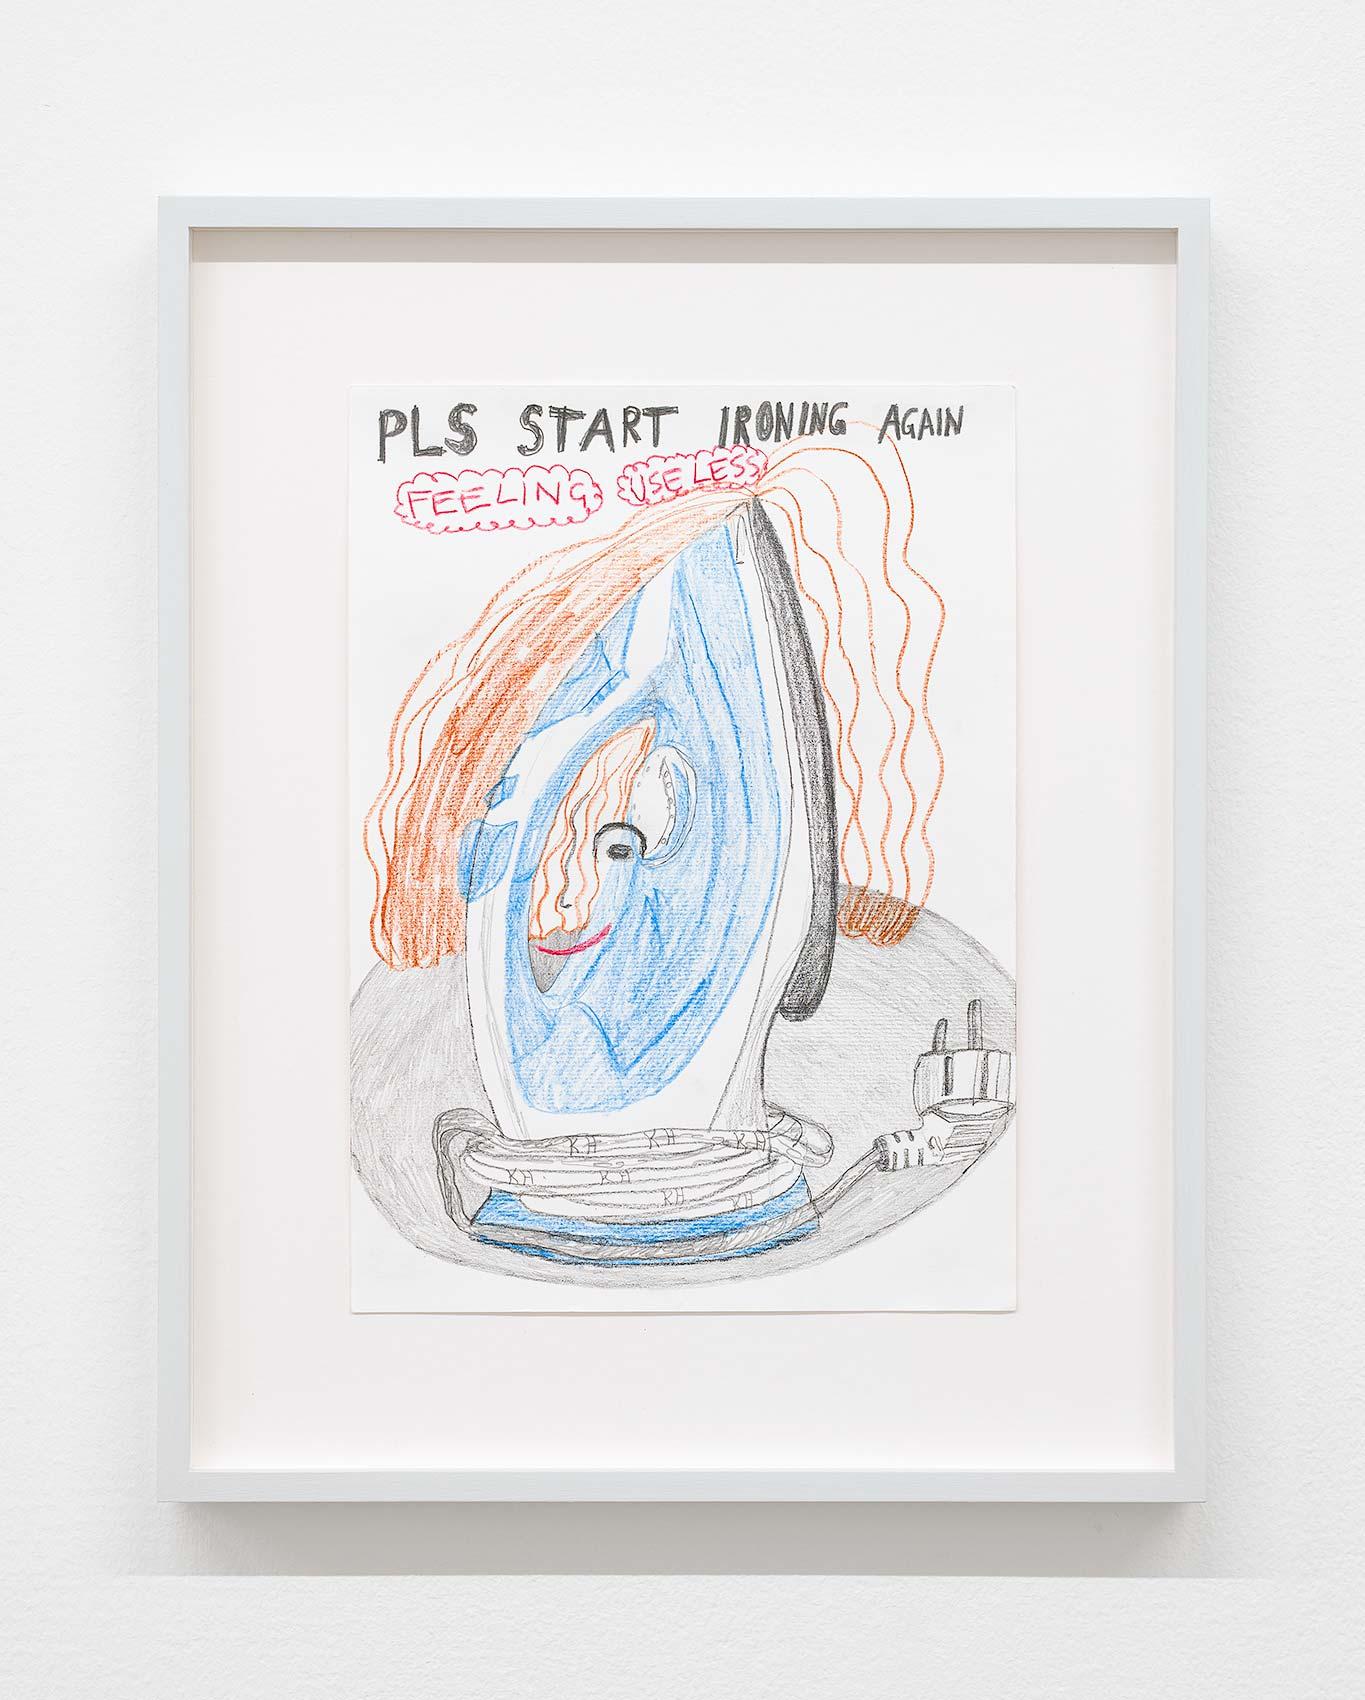 Katharina HÃ¶glinger, Iron, 2022, colored pencil and pencil on paper, 29,7 Ã— 21 cm, framed. Courtesy of Wonnerth Dejaco and the artist. Photo: Peter Mochi